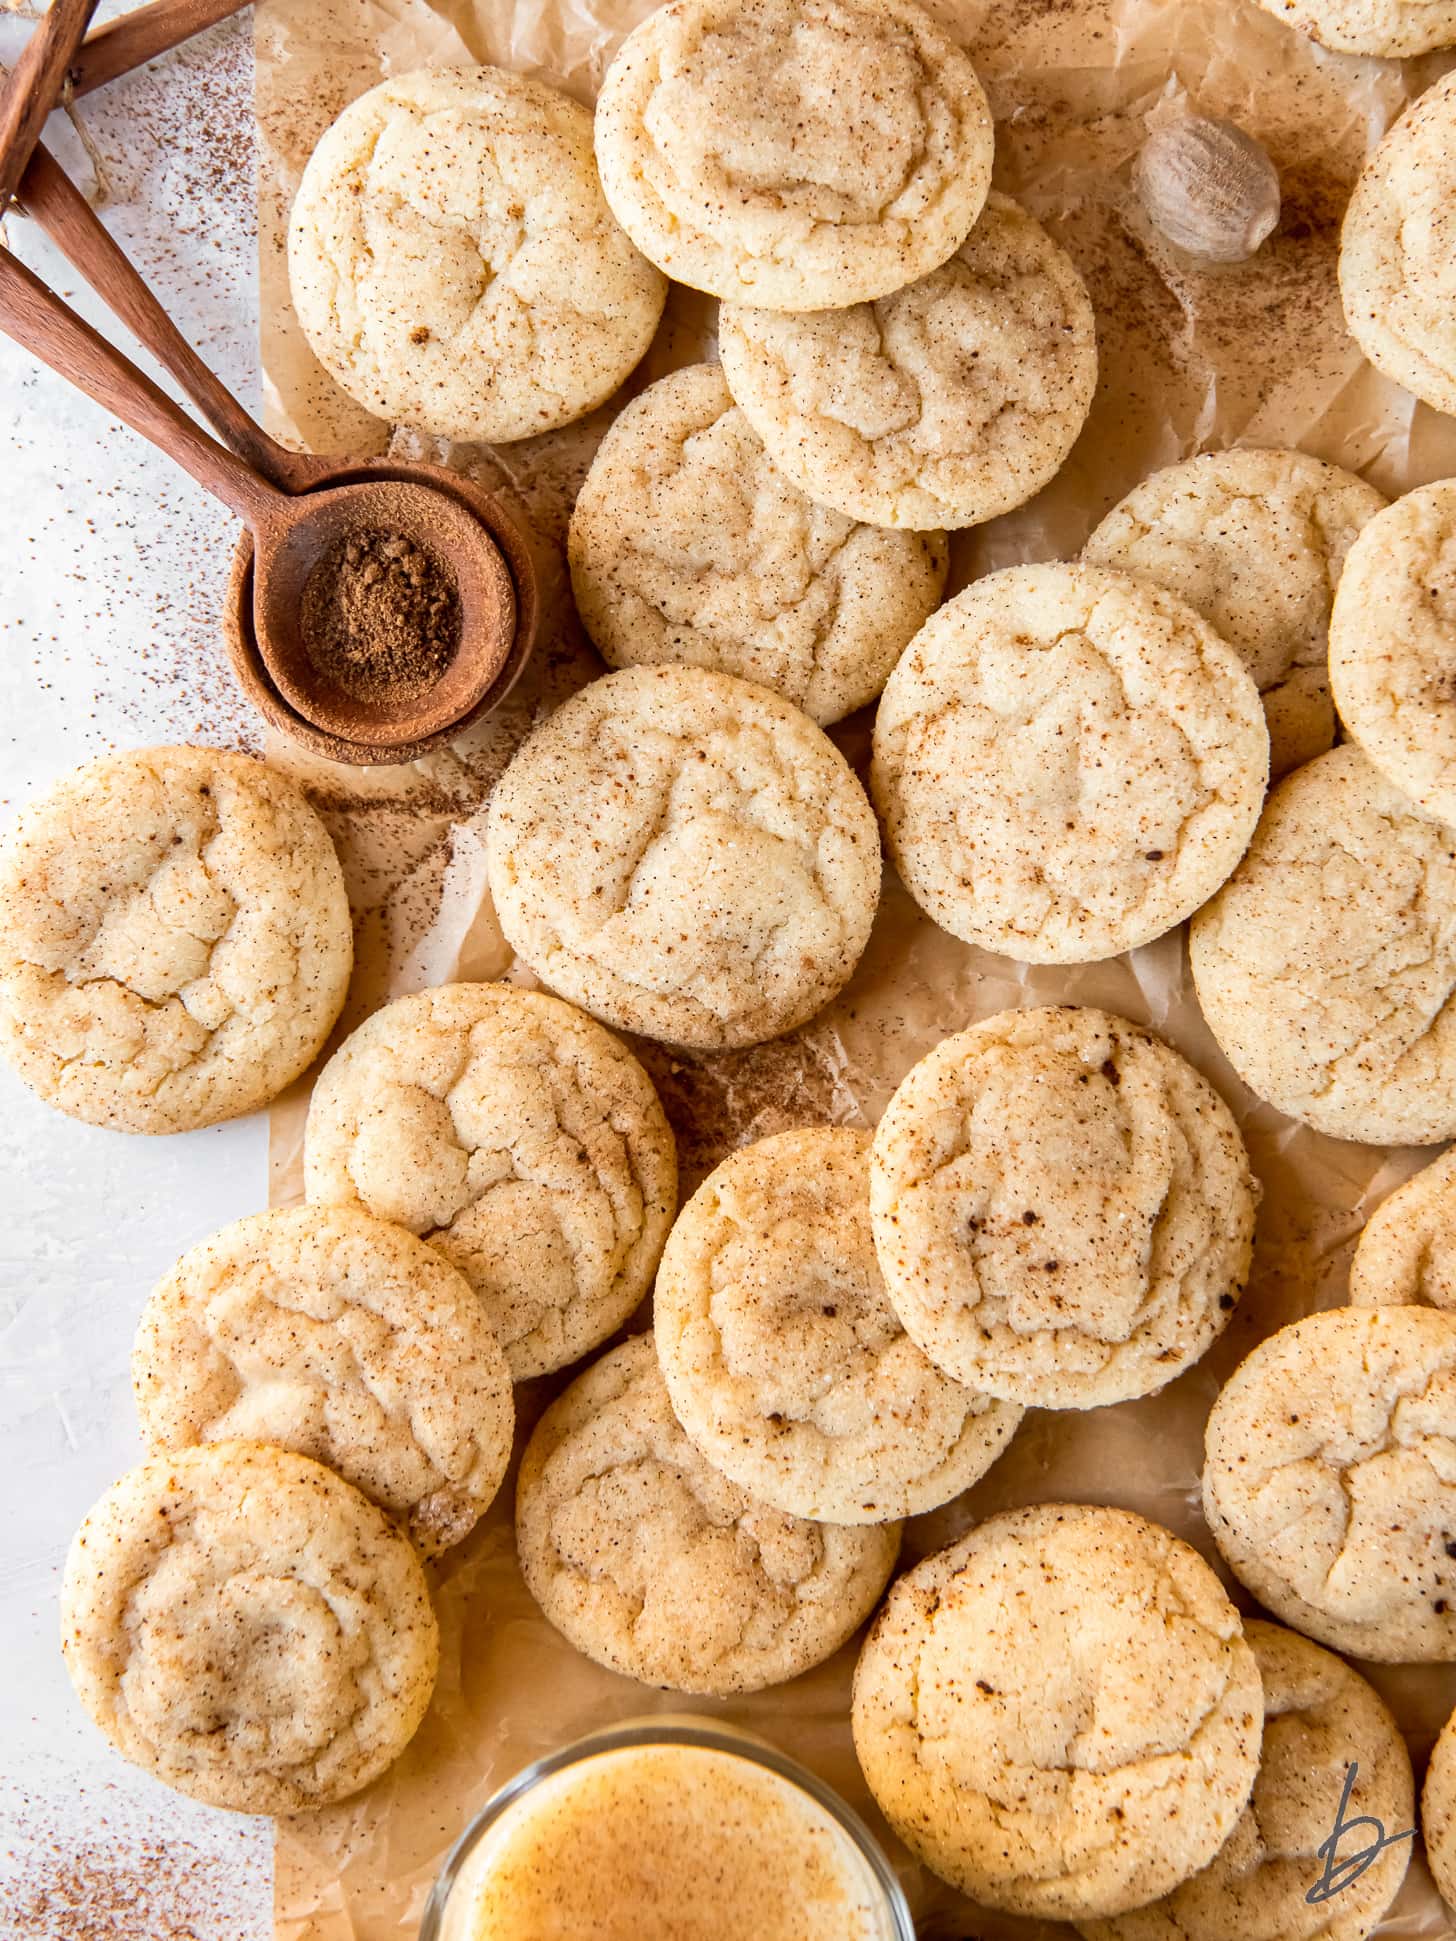 many eggnog snickerdoodles on parchment paper next to teaspoon of ground nutmeg.